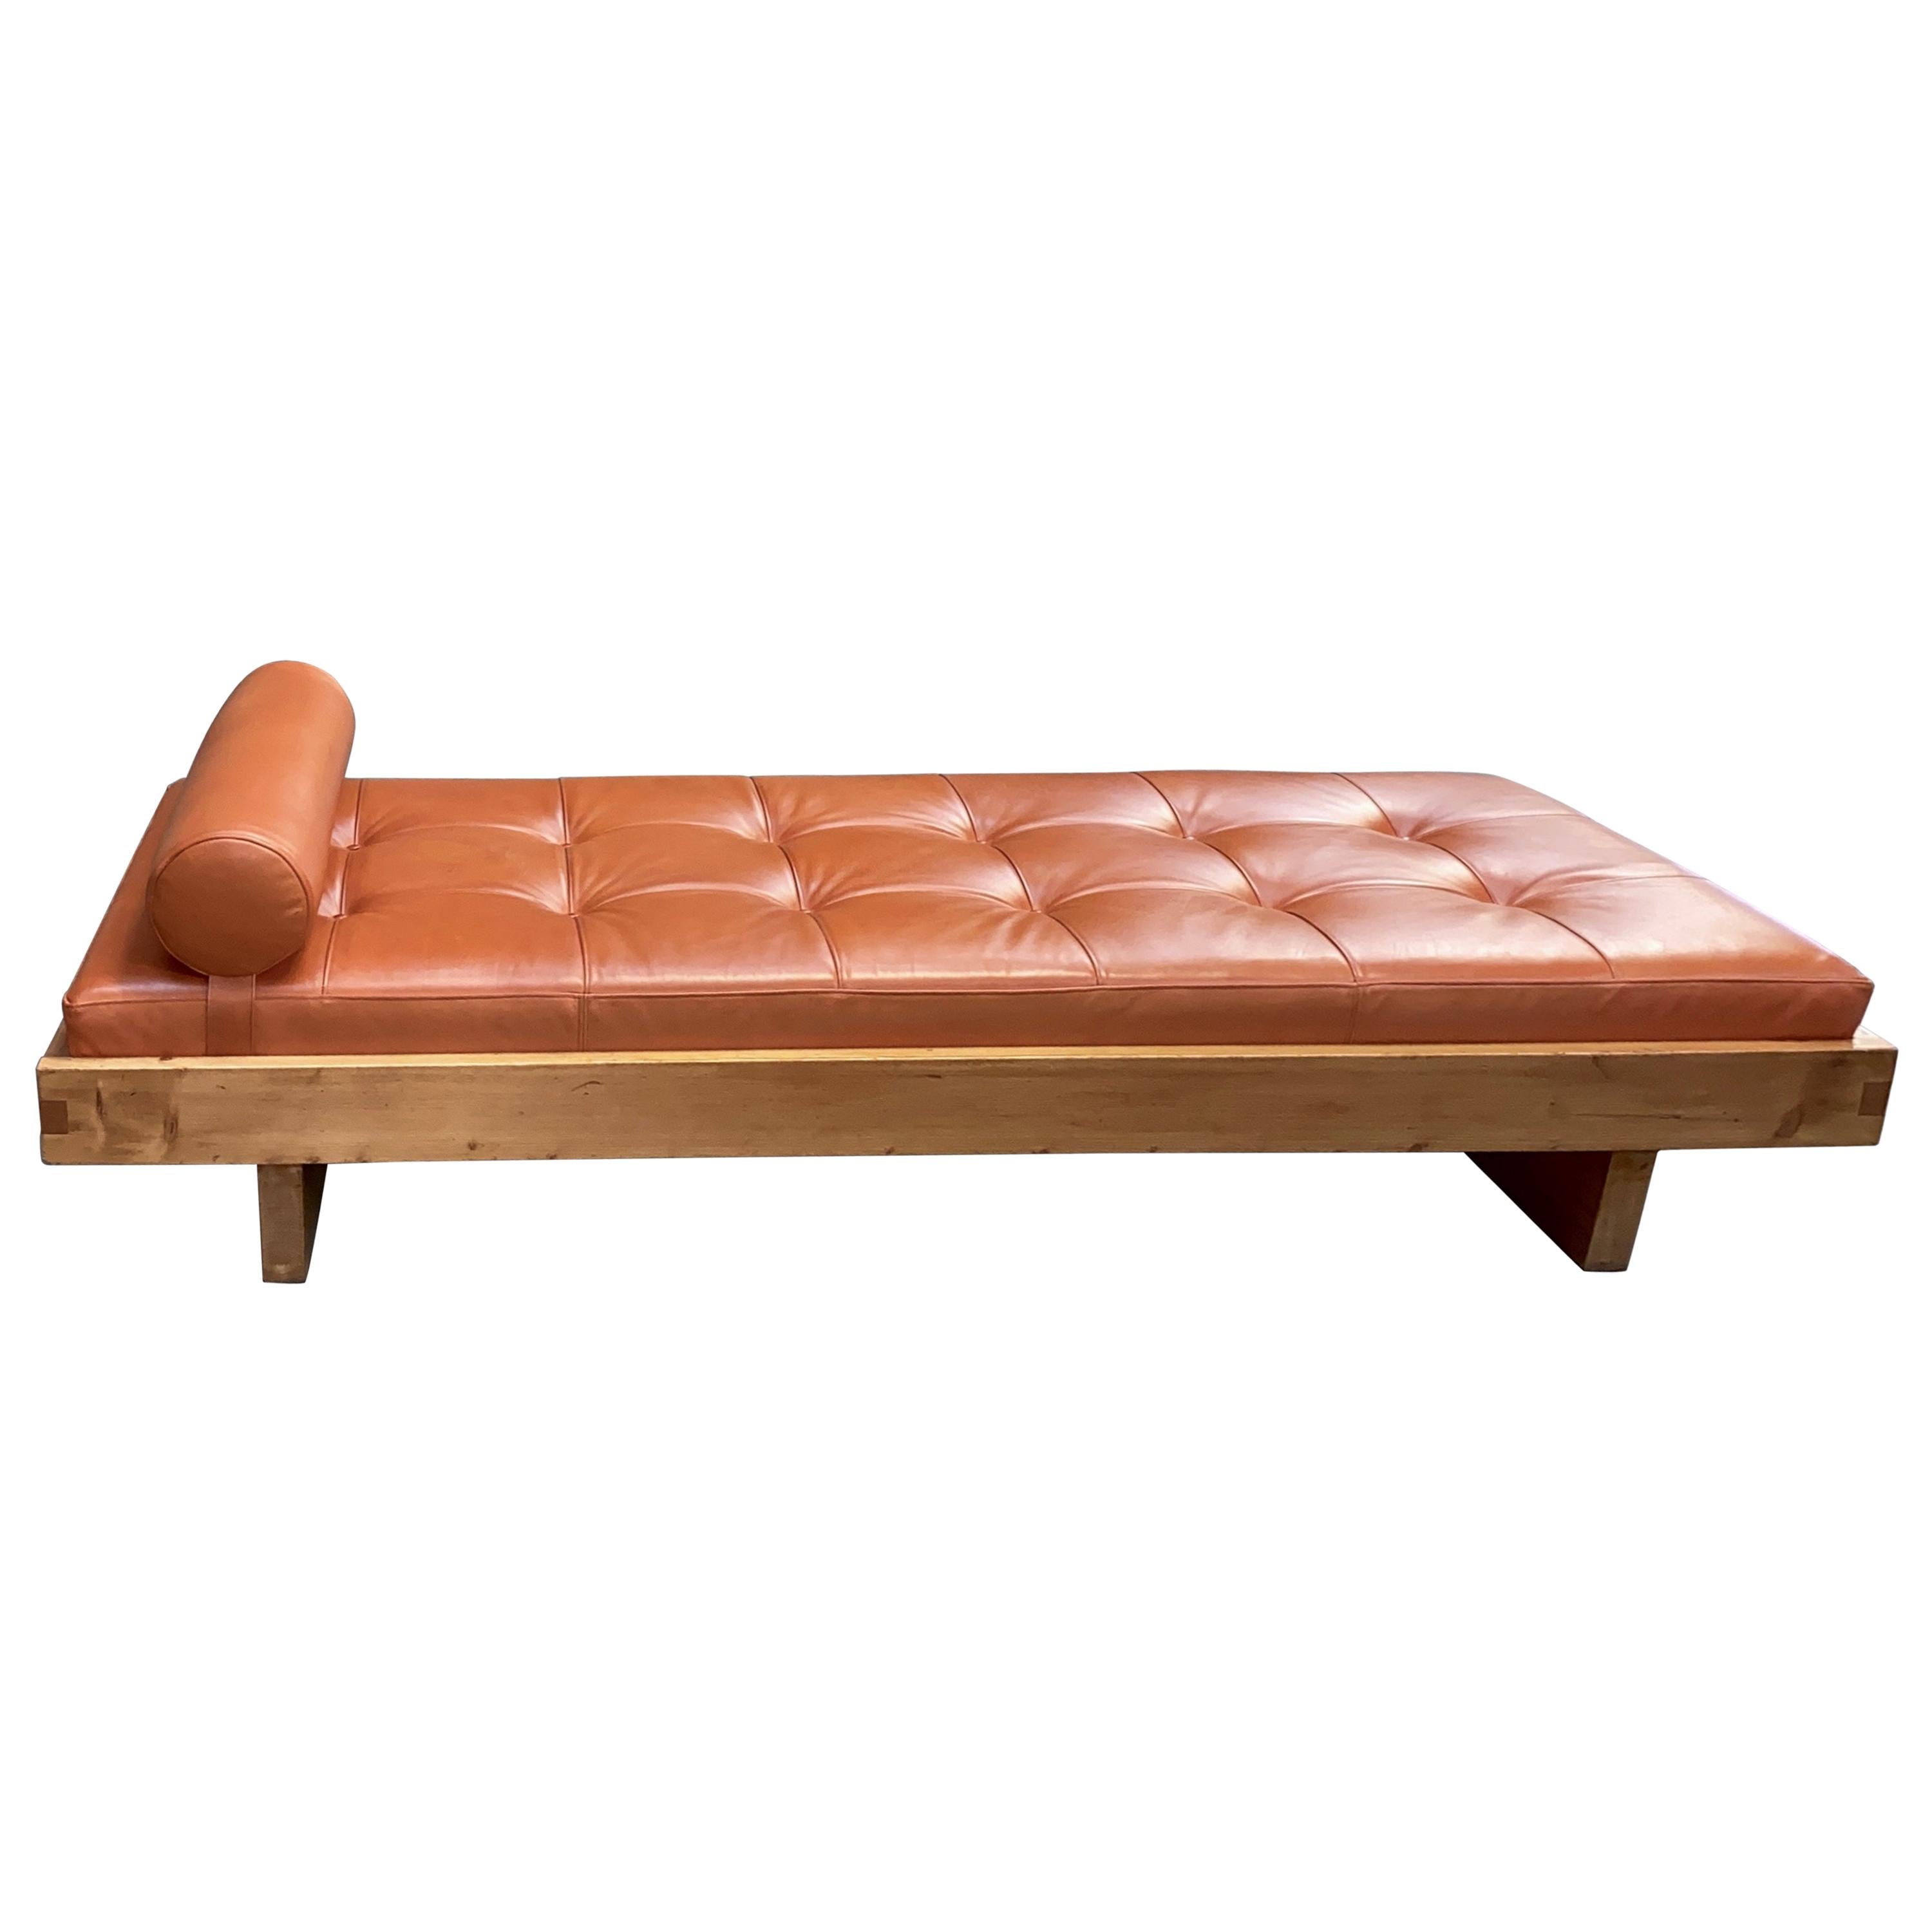 Charlotte Perriand Daybed in Ash from Méribel Les Allues at 1stDibs